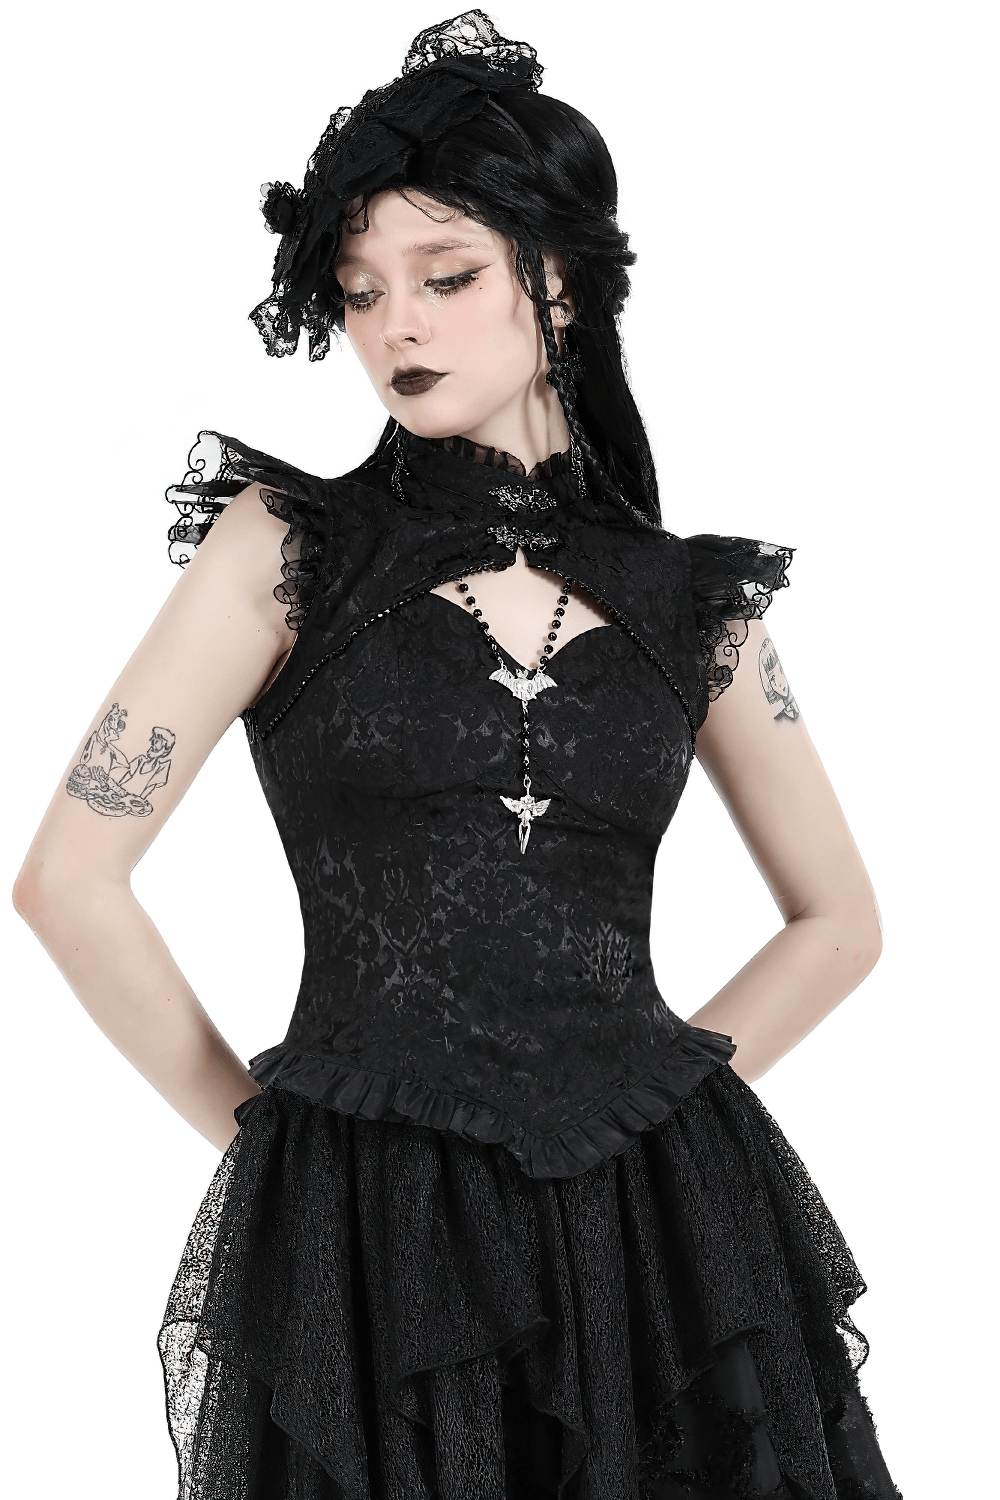 Unleash Your Gothic, Punk or Alt Styles with DARK IN LOVE